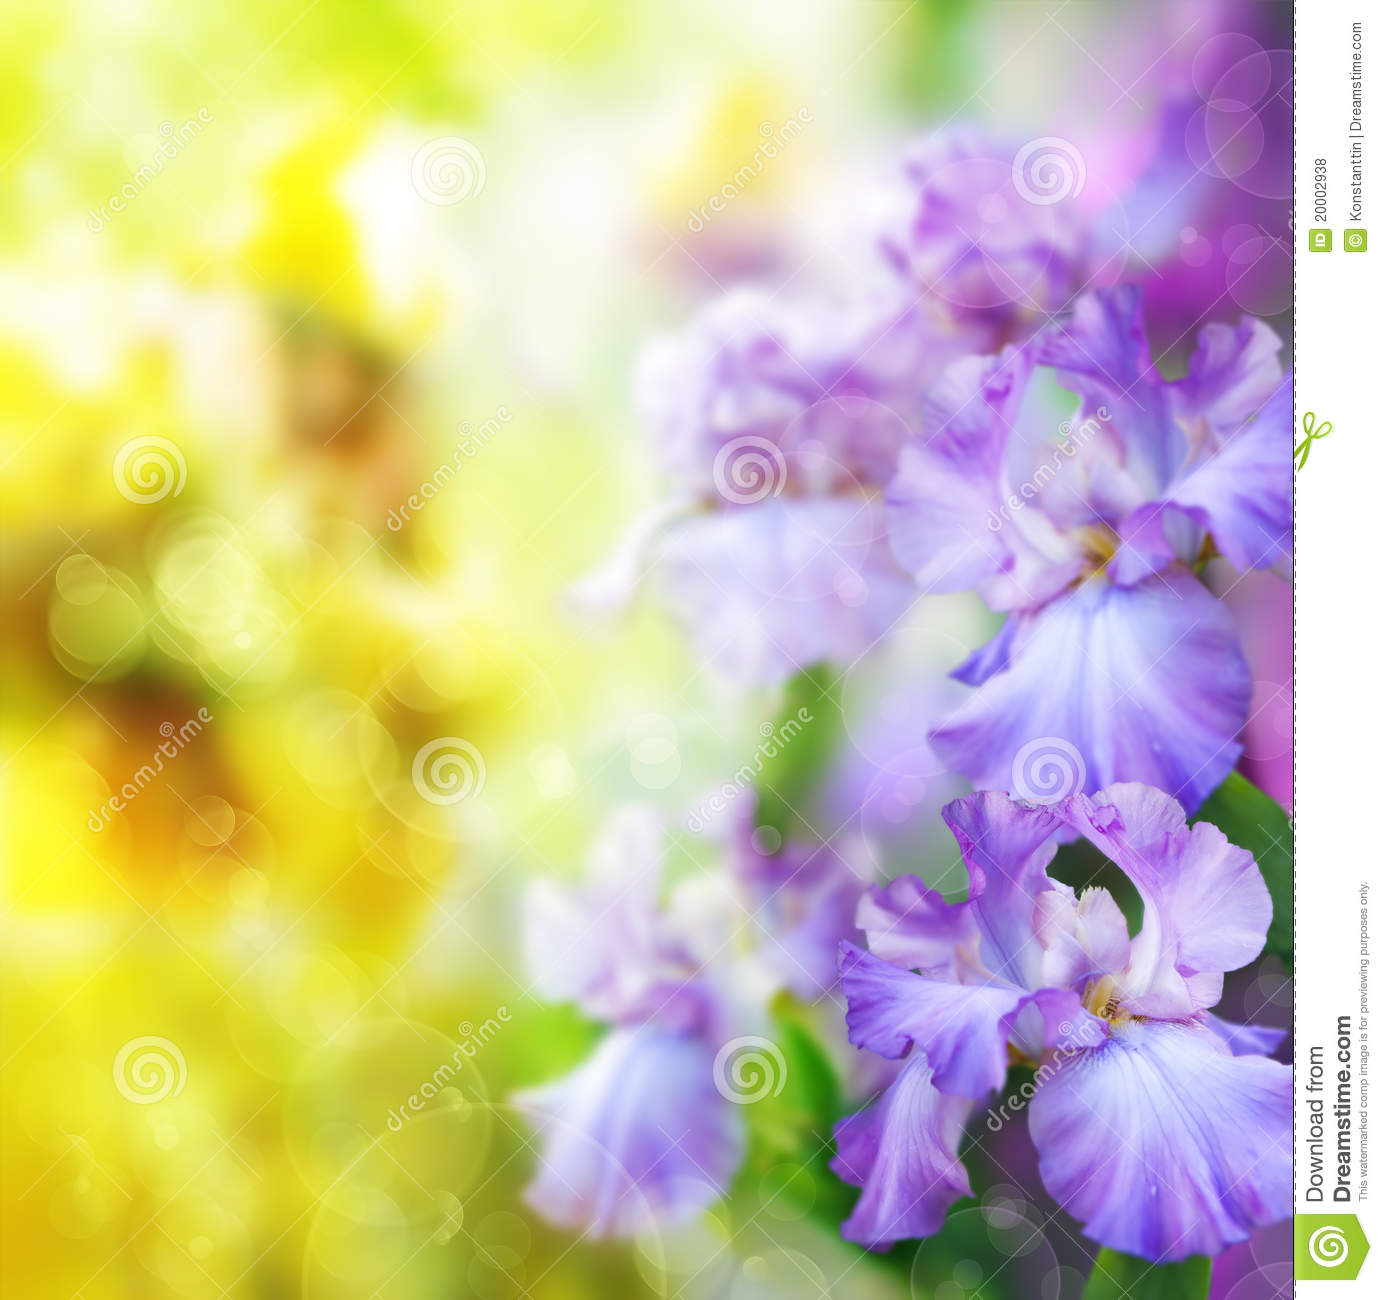 Abstract Spring Wallpaper High Definition